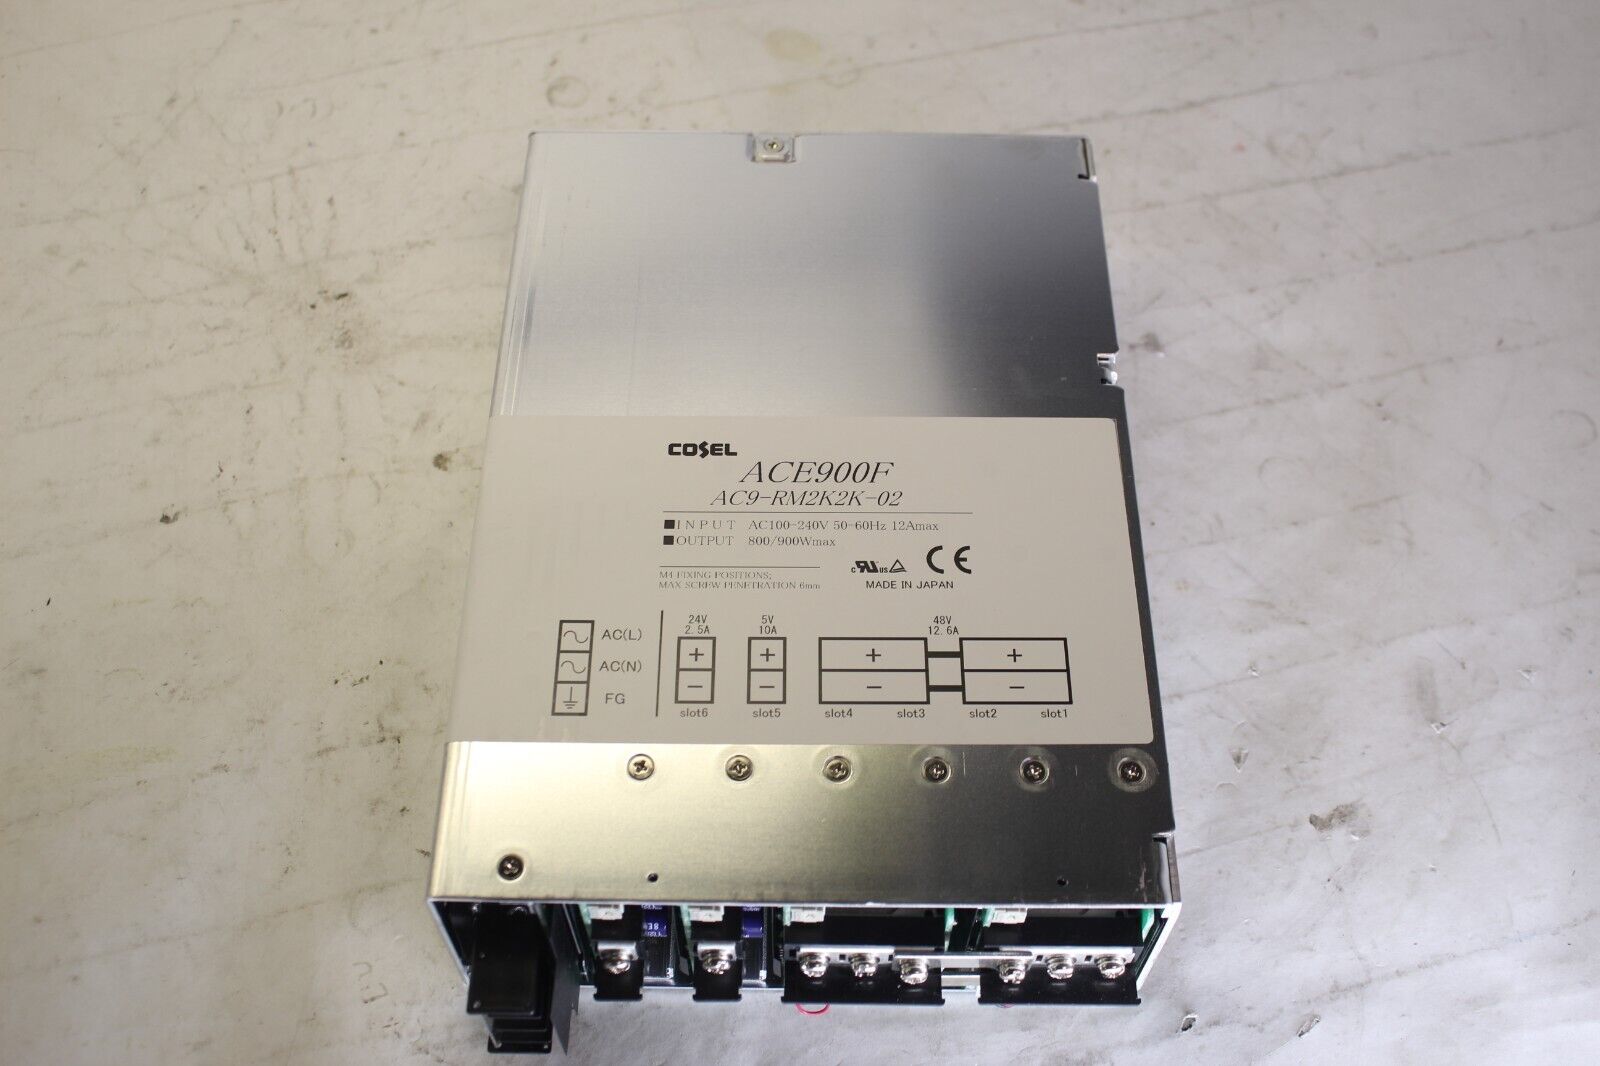 Cosel ACE900F Model AC9-RM2K2K-02 900Wmax Switching Power Supply